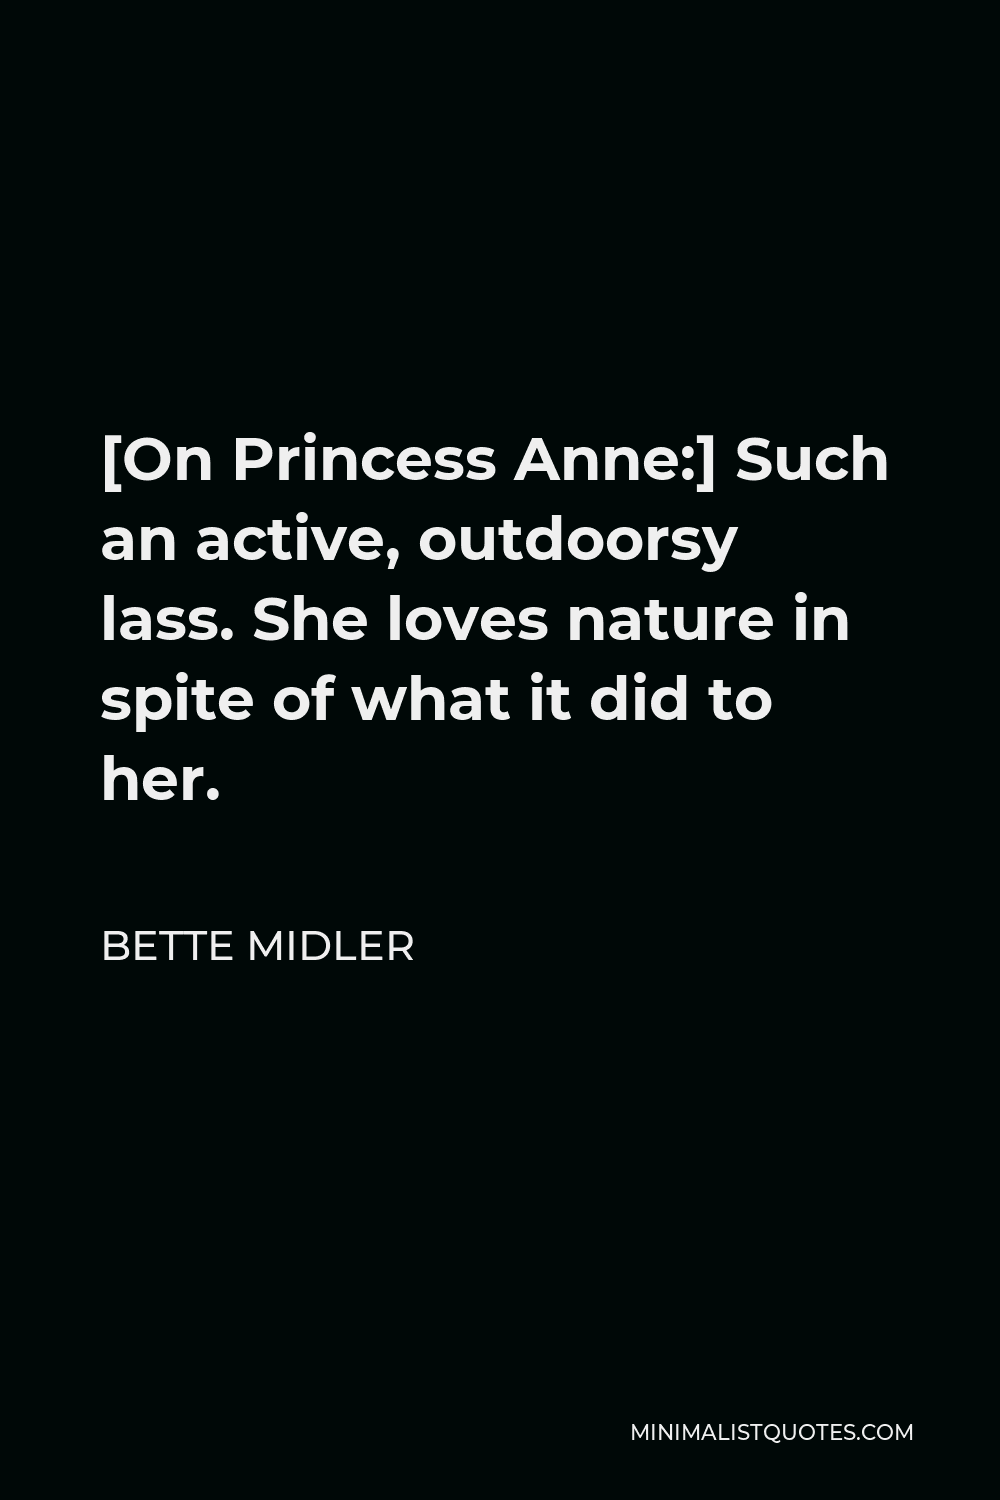 Bette Midler Quote - [On Princess Anne:] Such an active, outdoorsy lass. She loves nature in spite of what it did to her.